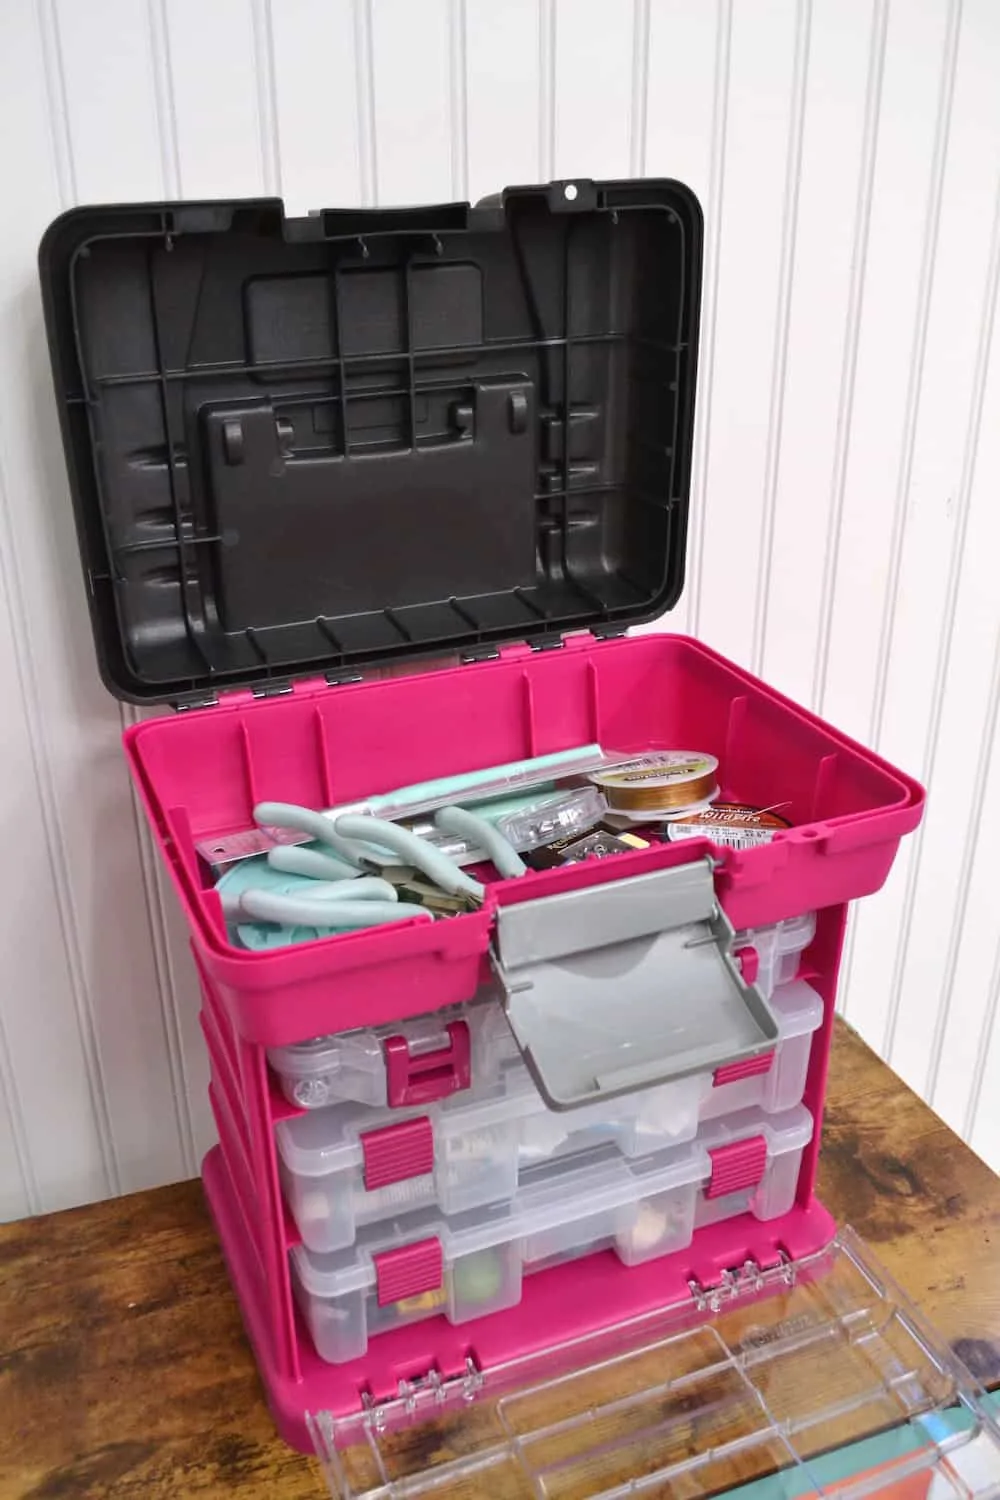 6 Tips for Organizing & Storing Your Jewelry-Making Supplies